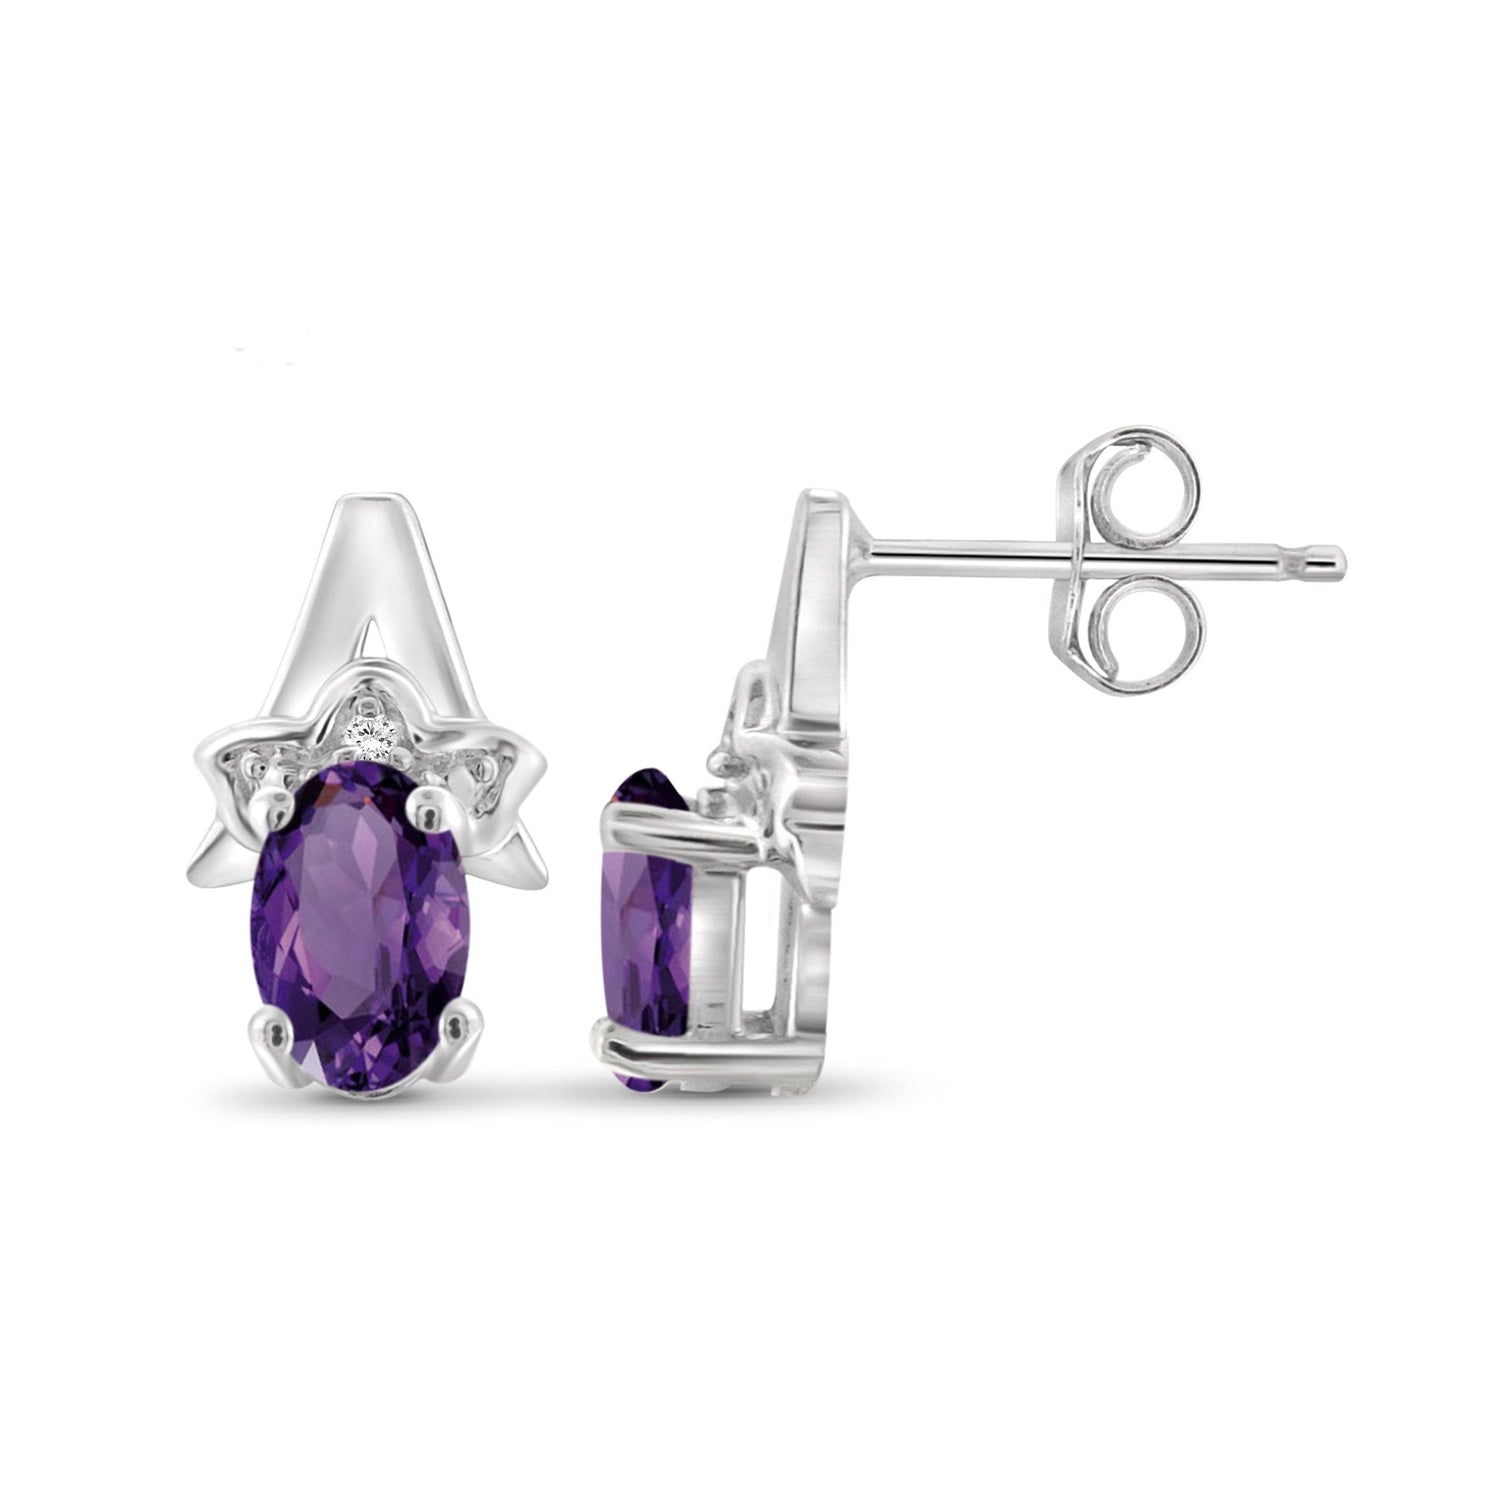 0.84 Carat T.G.W. Amethyst Gemstone and White Diamond Accent Sterling Silver Earrings